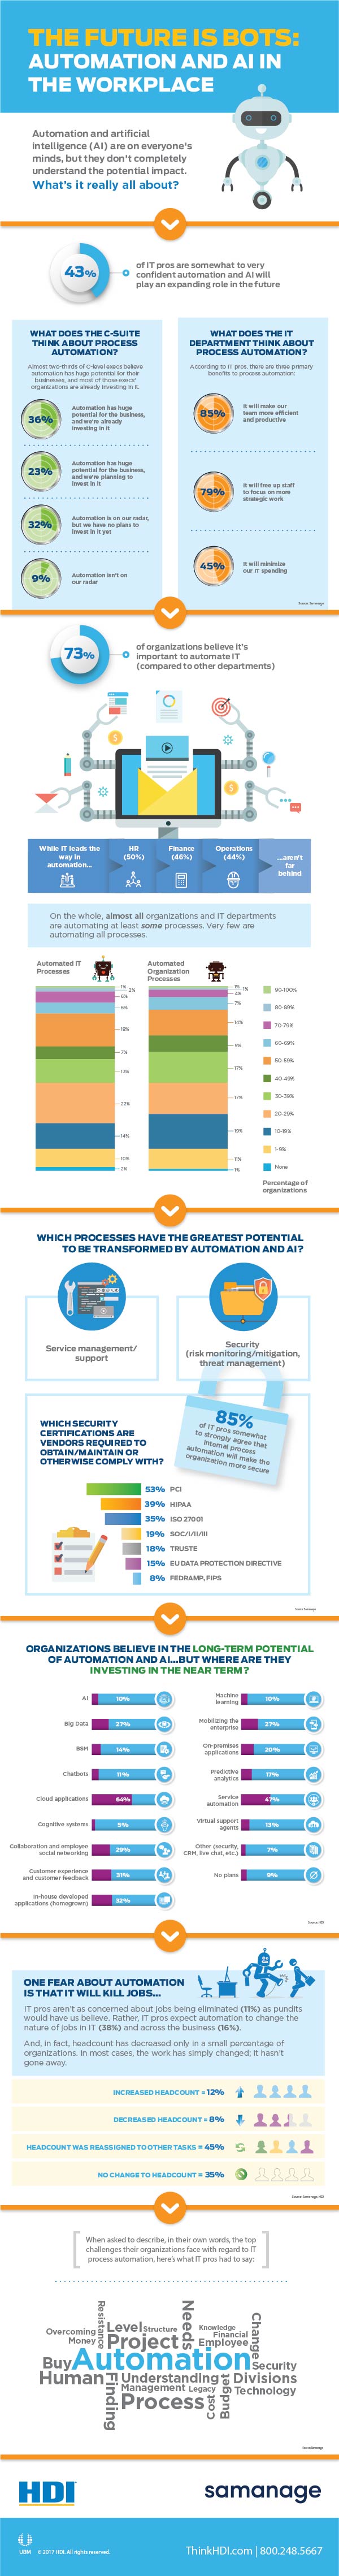 Infographic on process automation